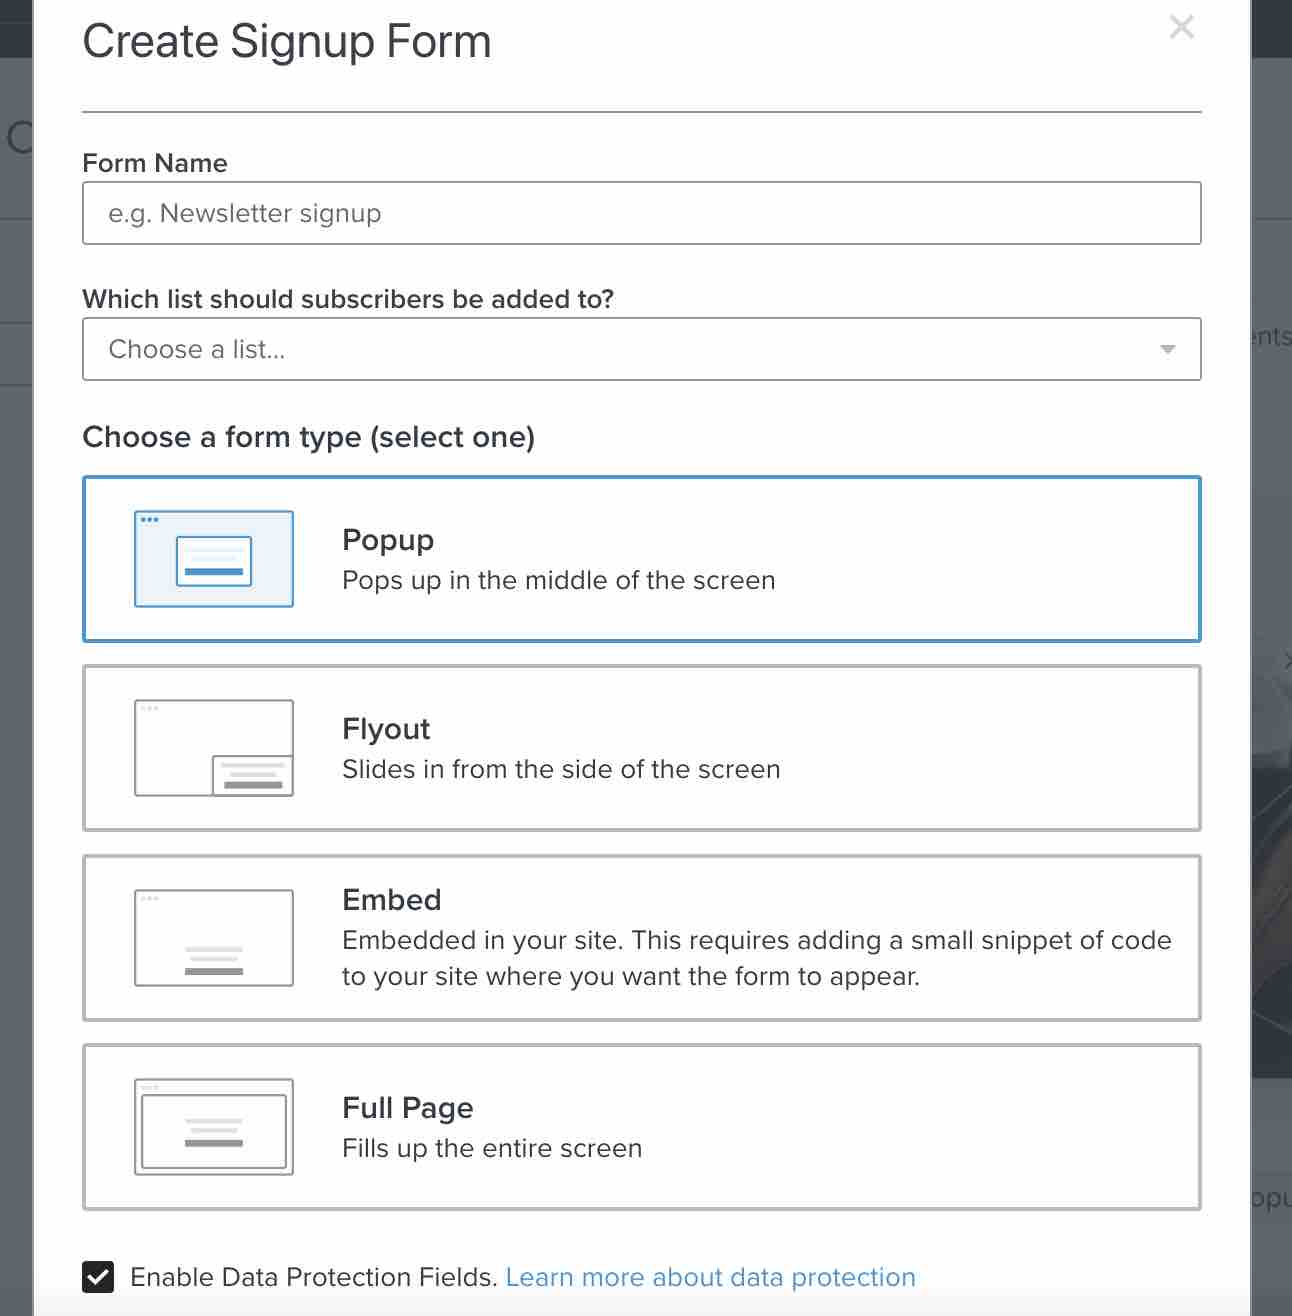 The menu where you can select a form type and enable data protection fields when you choose to build a form from scratch.